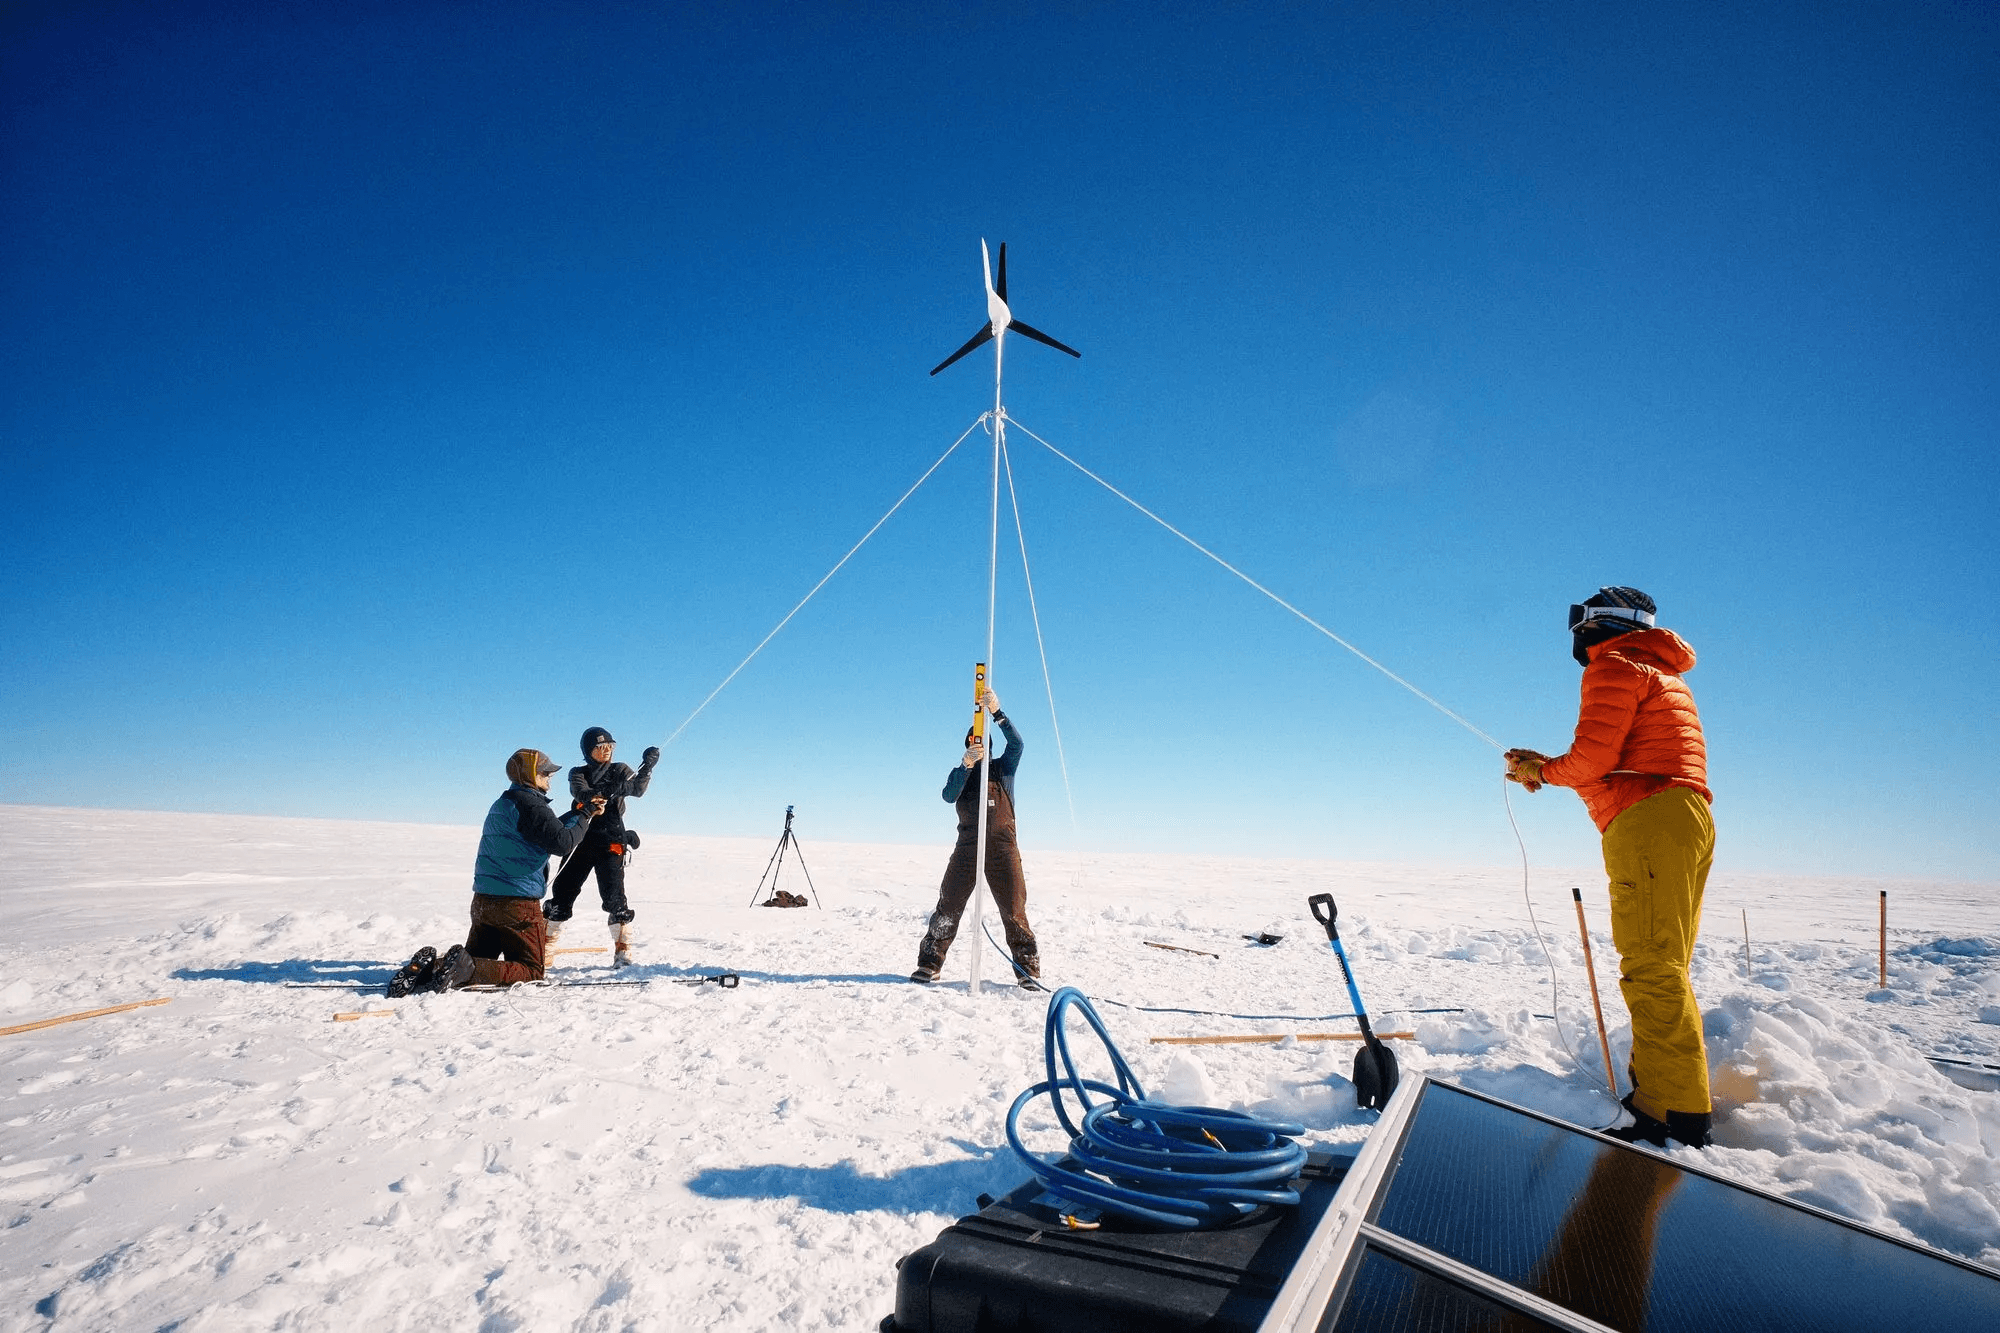 Four people setting up a wind turbine. Three people are holding lines, while one is holding the pole in the center.